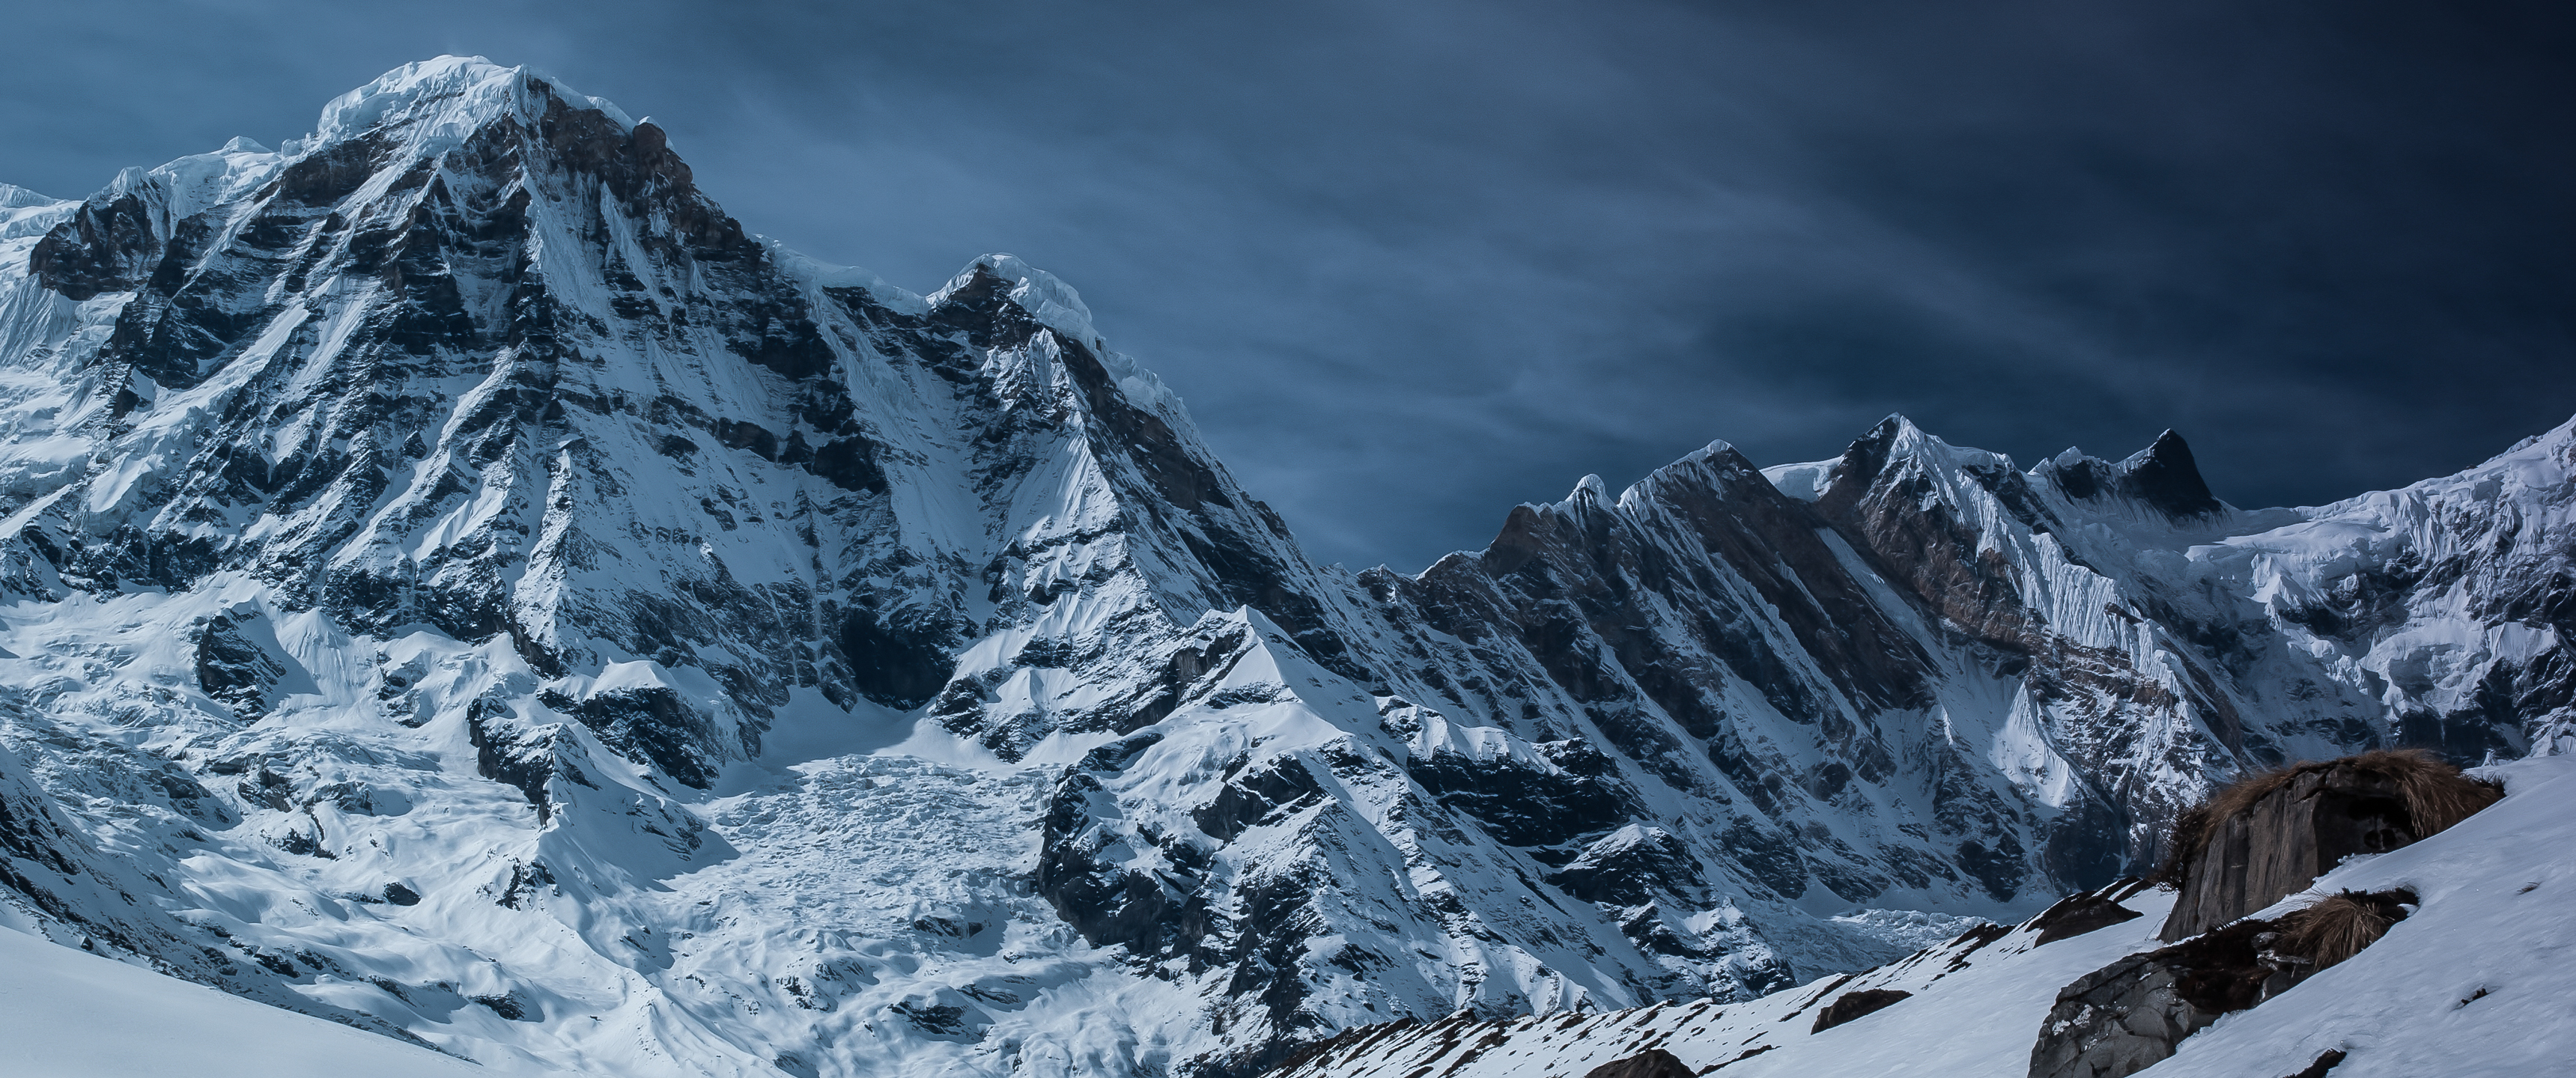 Snow Covered Mountains Wallpaper Ultrawide Monitor